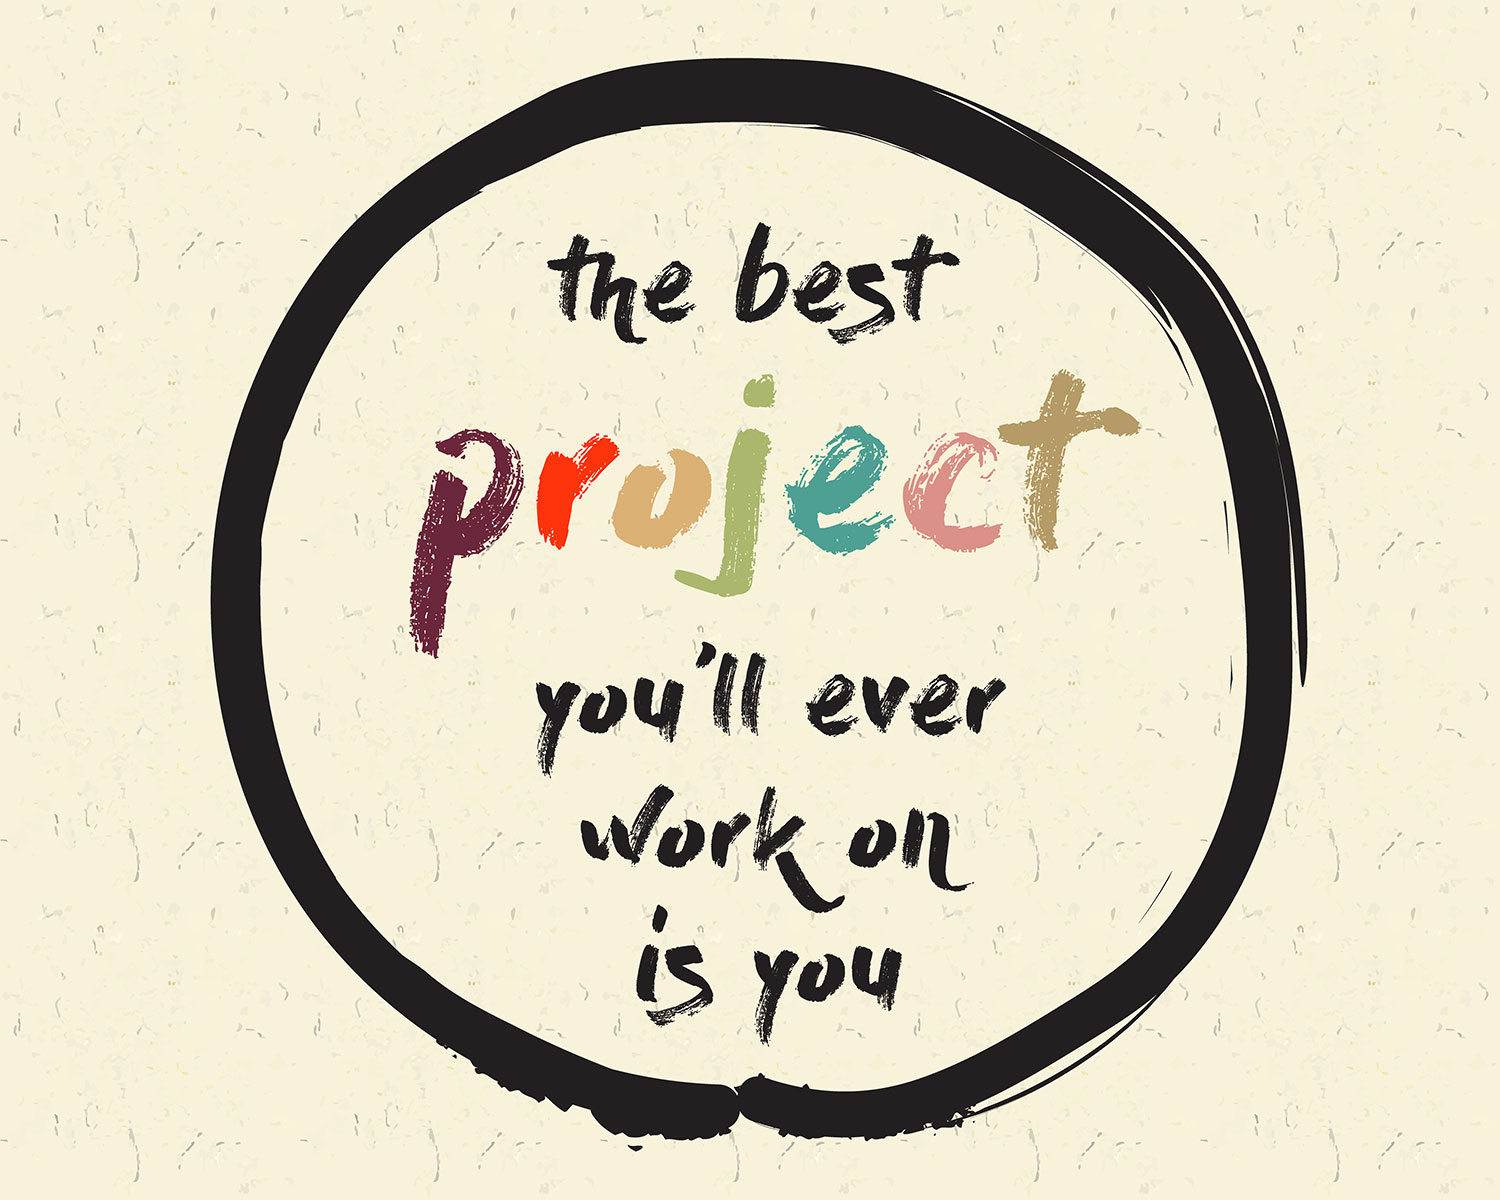 Hand Written Text In A Black Circle Which Says 'The Best Project You'Ll Ever Work On Is You'. The Word Project Is In Multiple Colors, The Rest Of The Words Are Black.